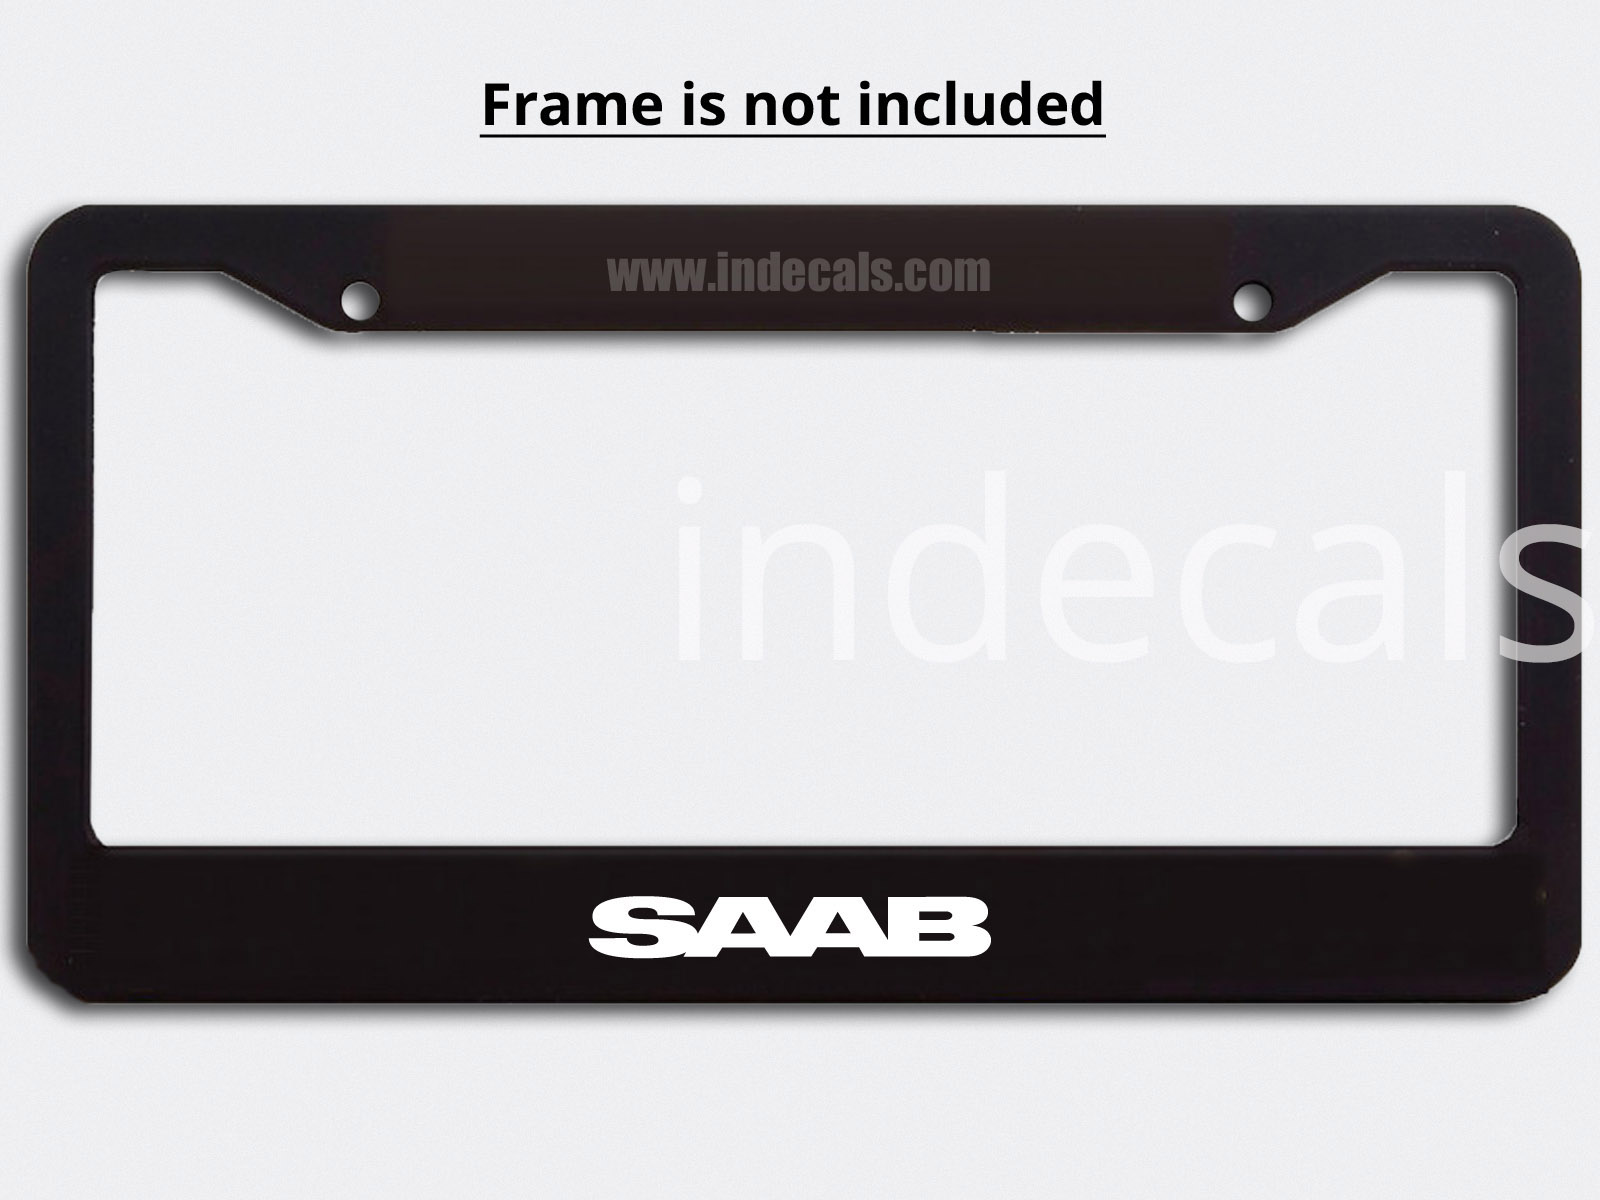 3 x Saab Stickers for Plate Frame - White